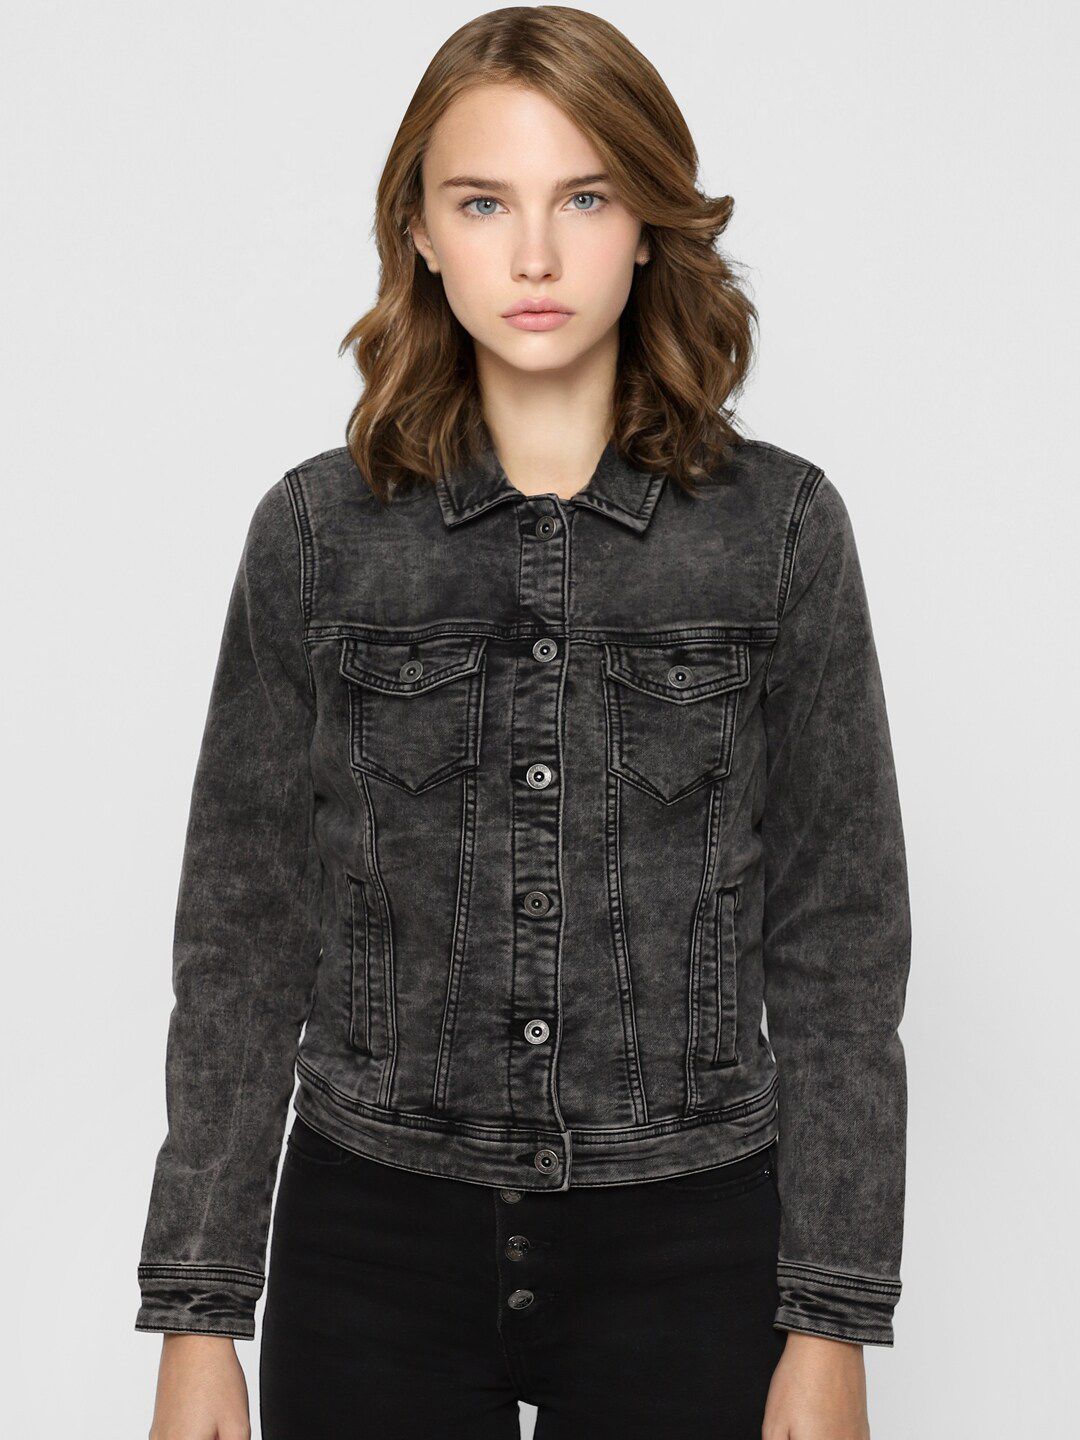 ONLY Women Black Washed Denim Jacket Price in India